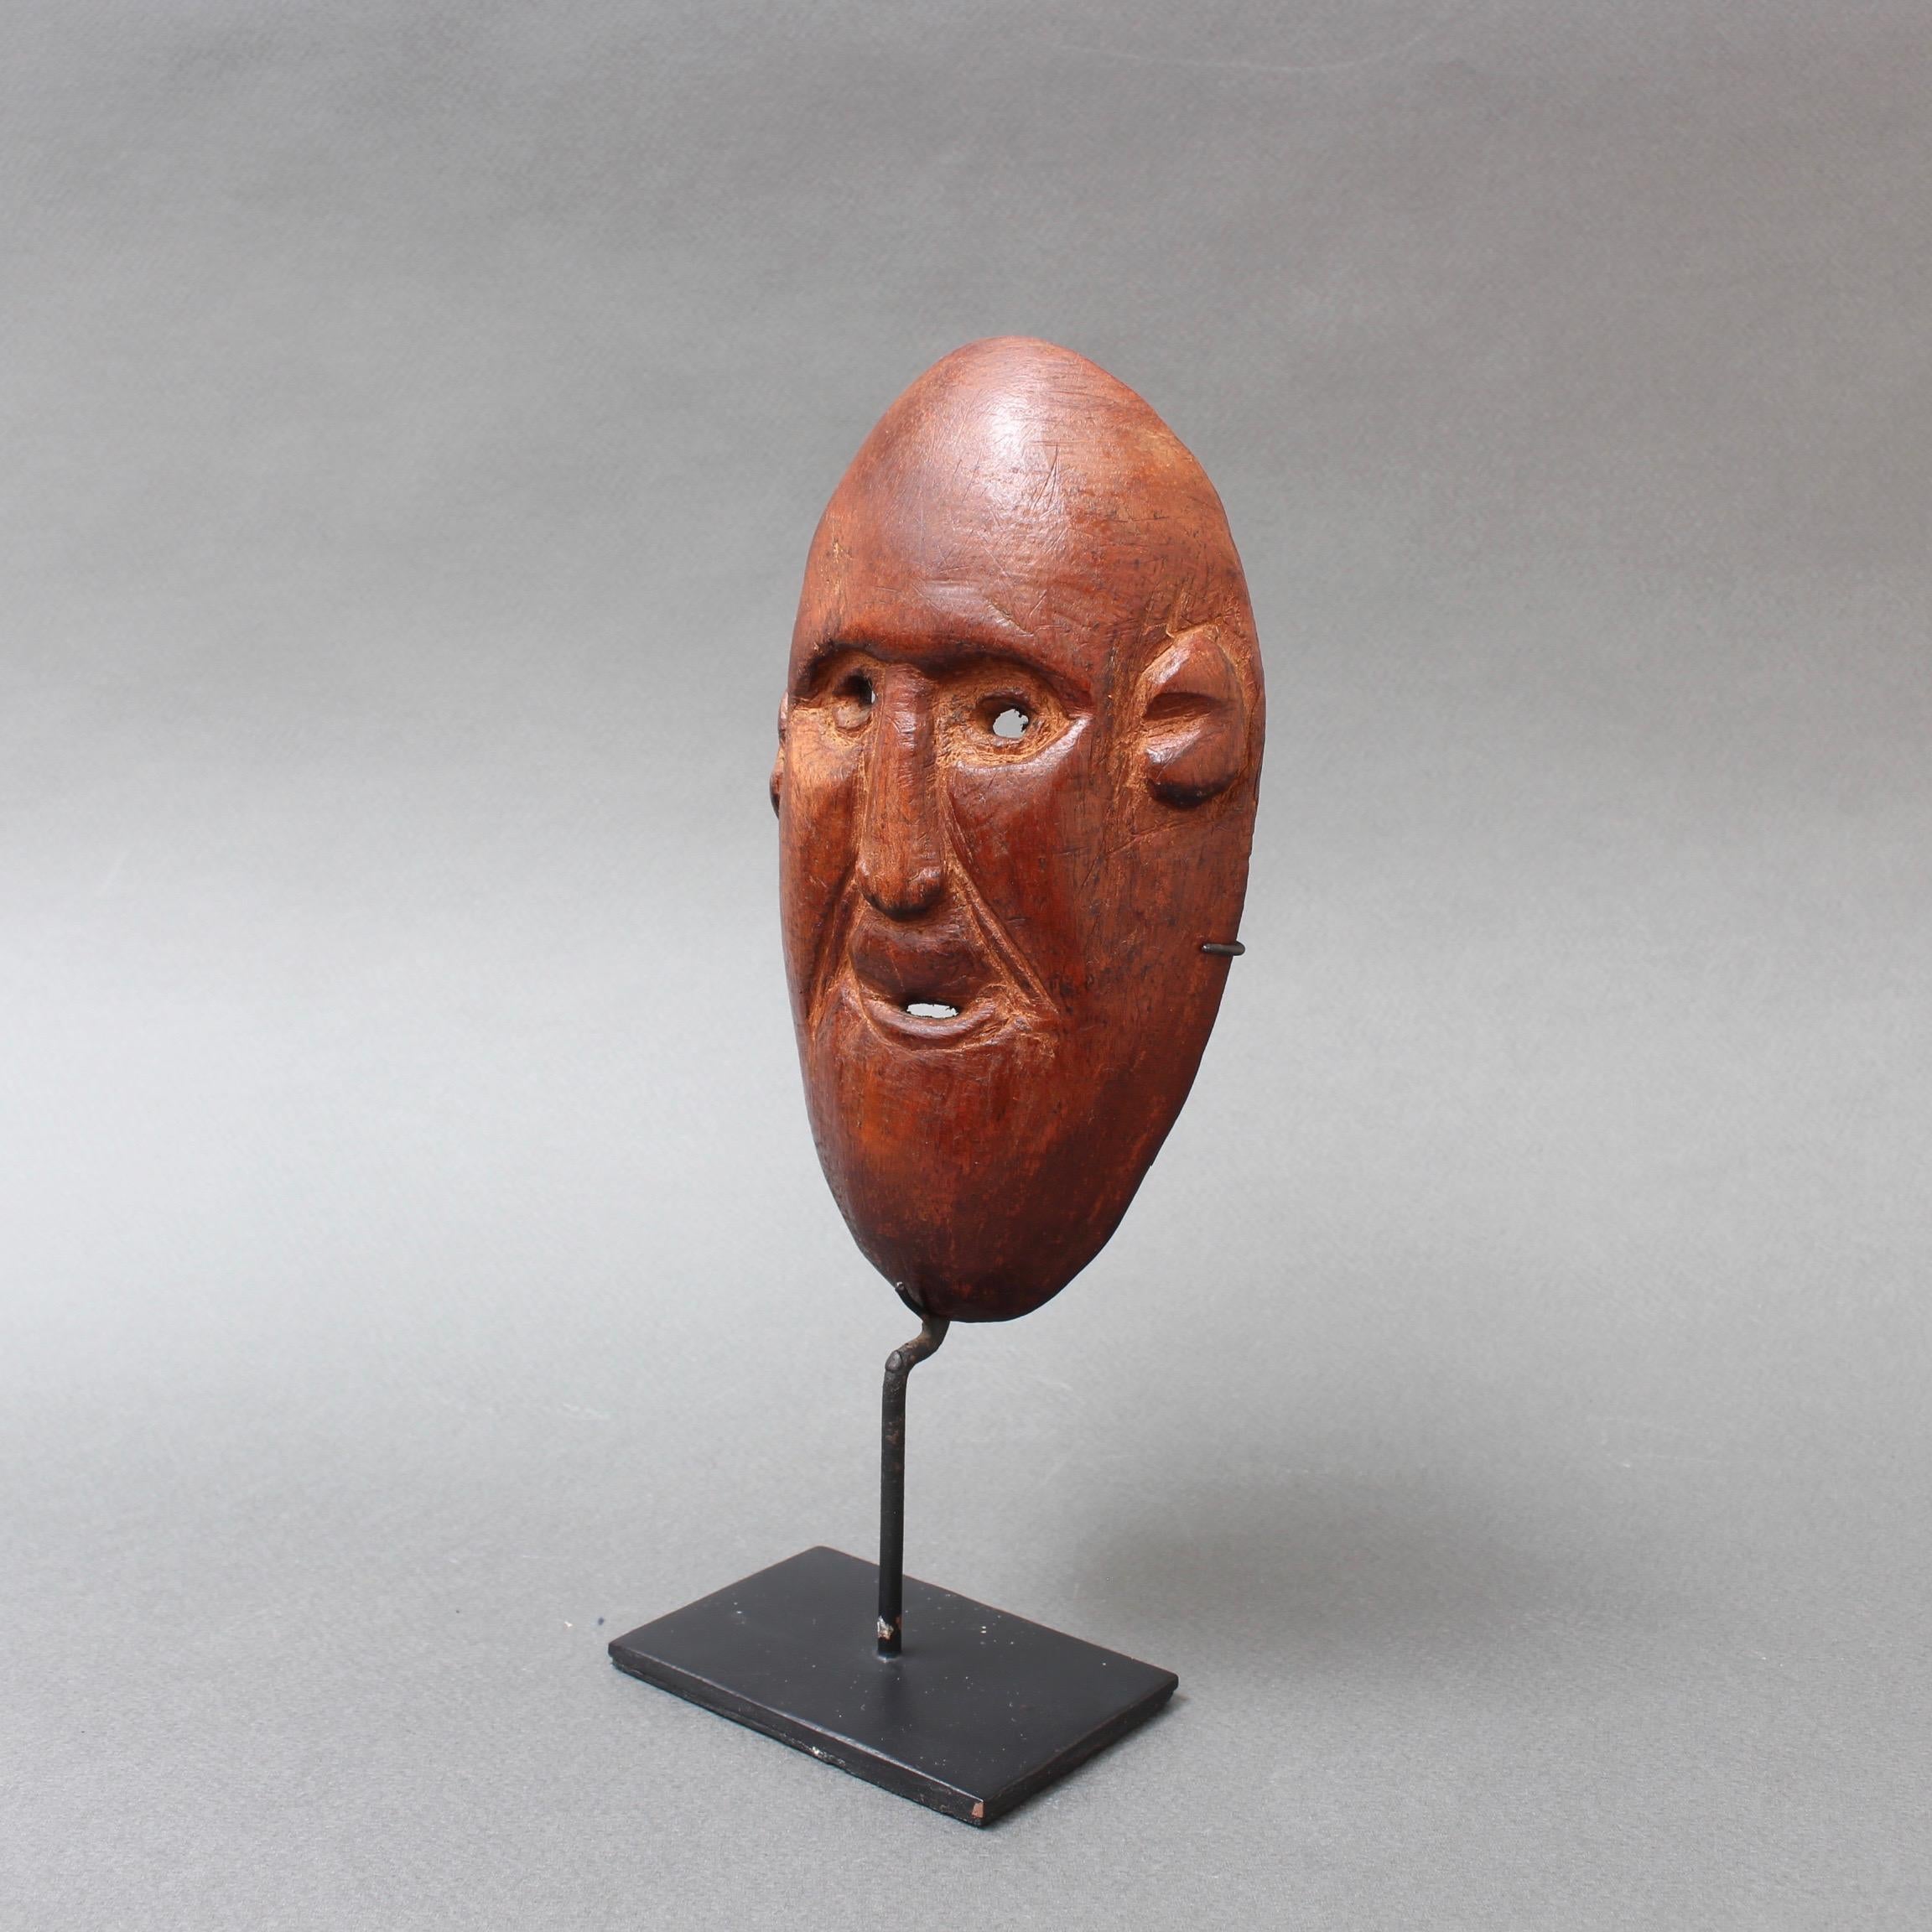 Timor Island sculpted wooden traditional mask (circa 1960s-1970s) on contemporary stand. This is a traditional mask of a figure with male facial features and two holes as eyes and another for the mouth. The island of Timor gave rise to a distinctive